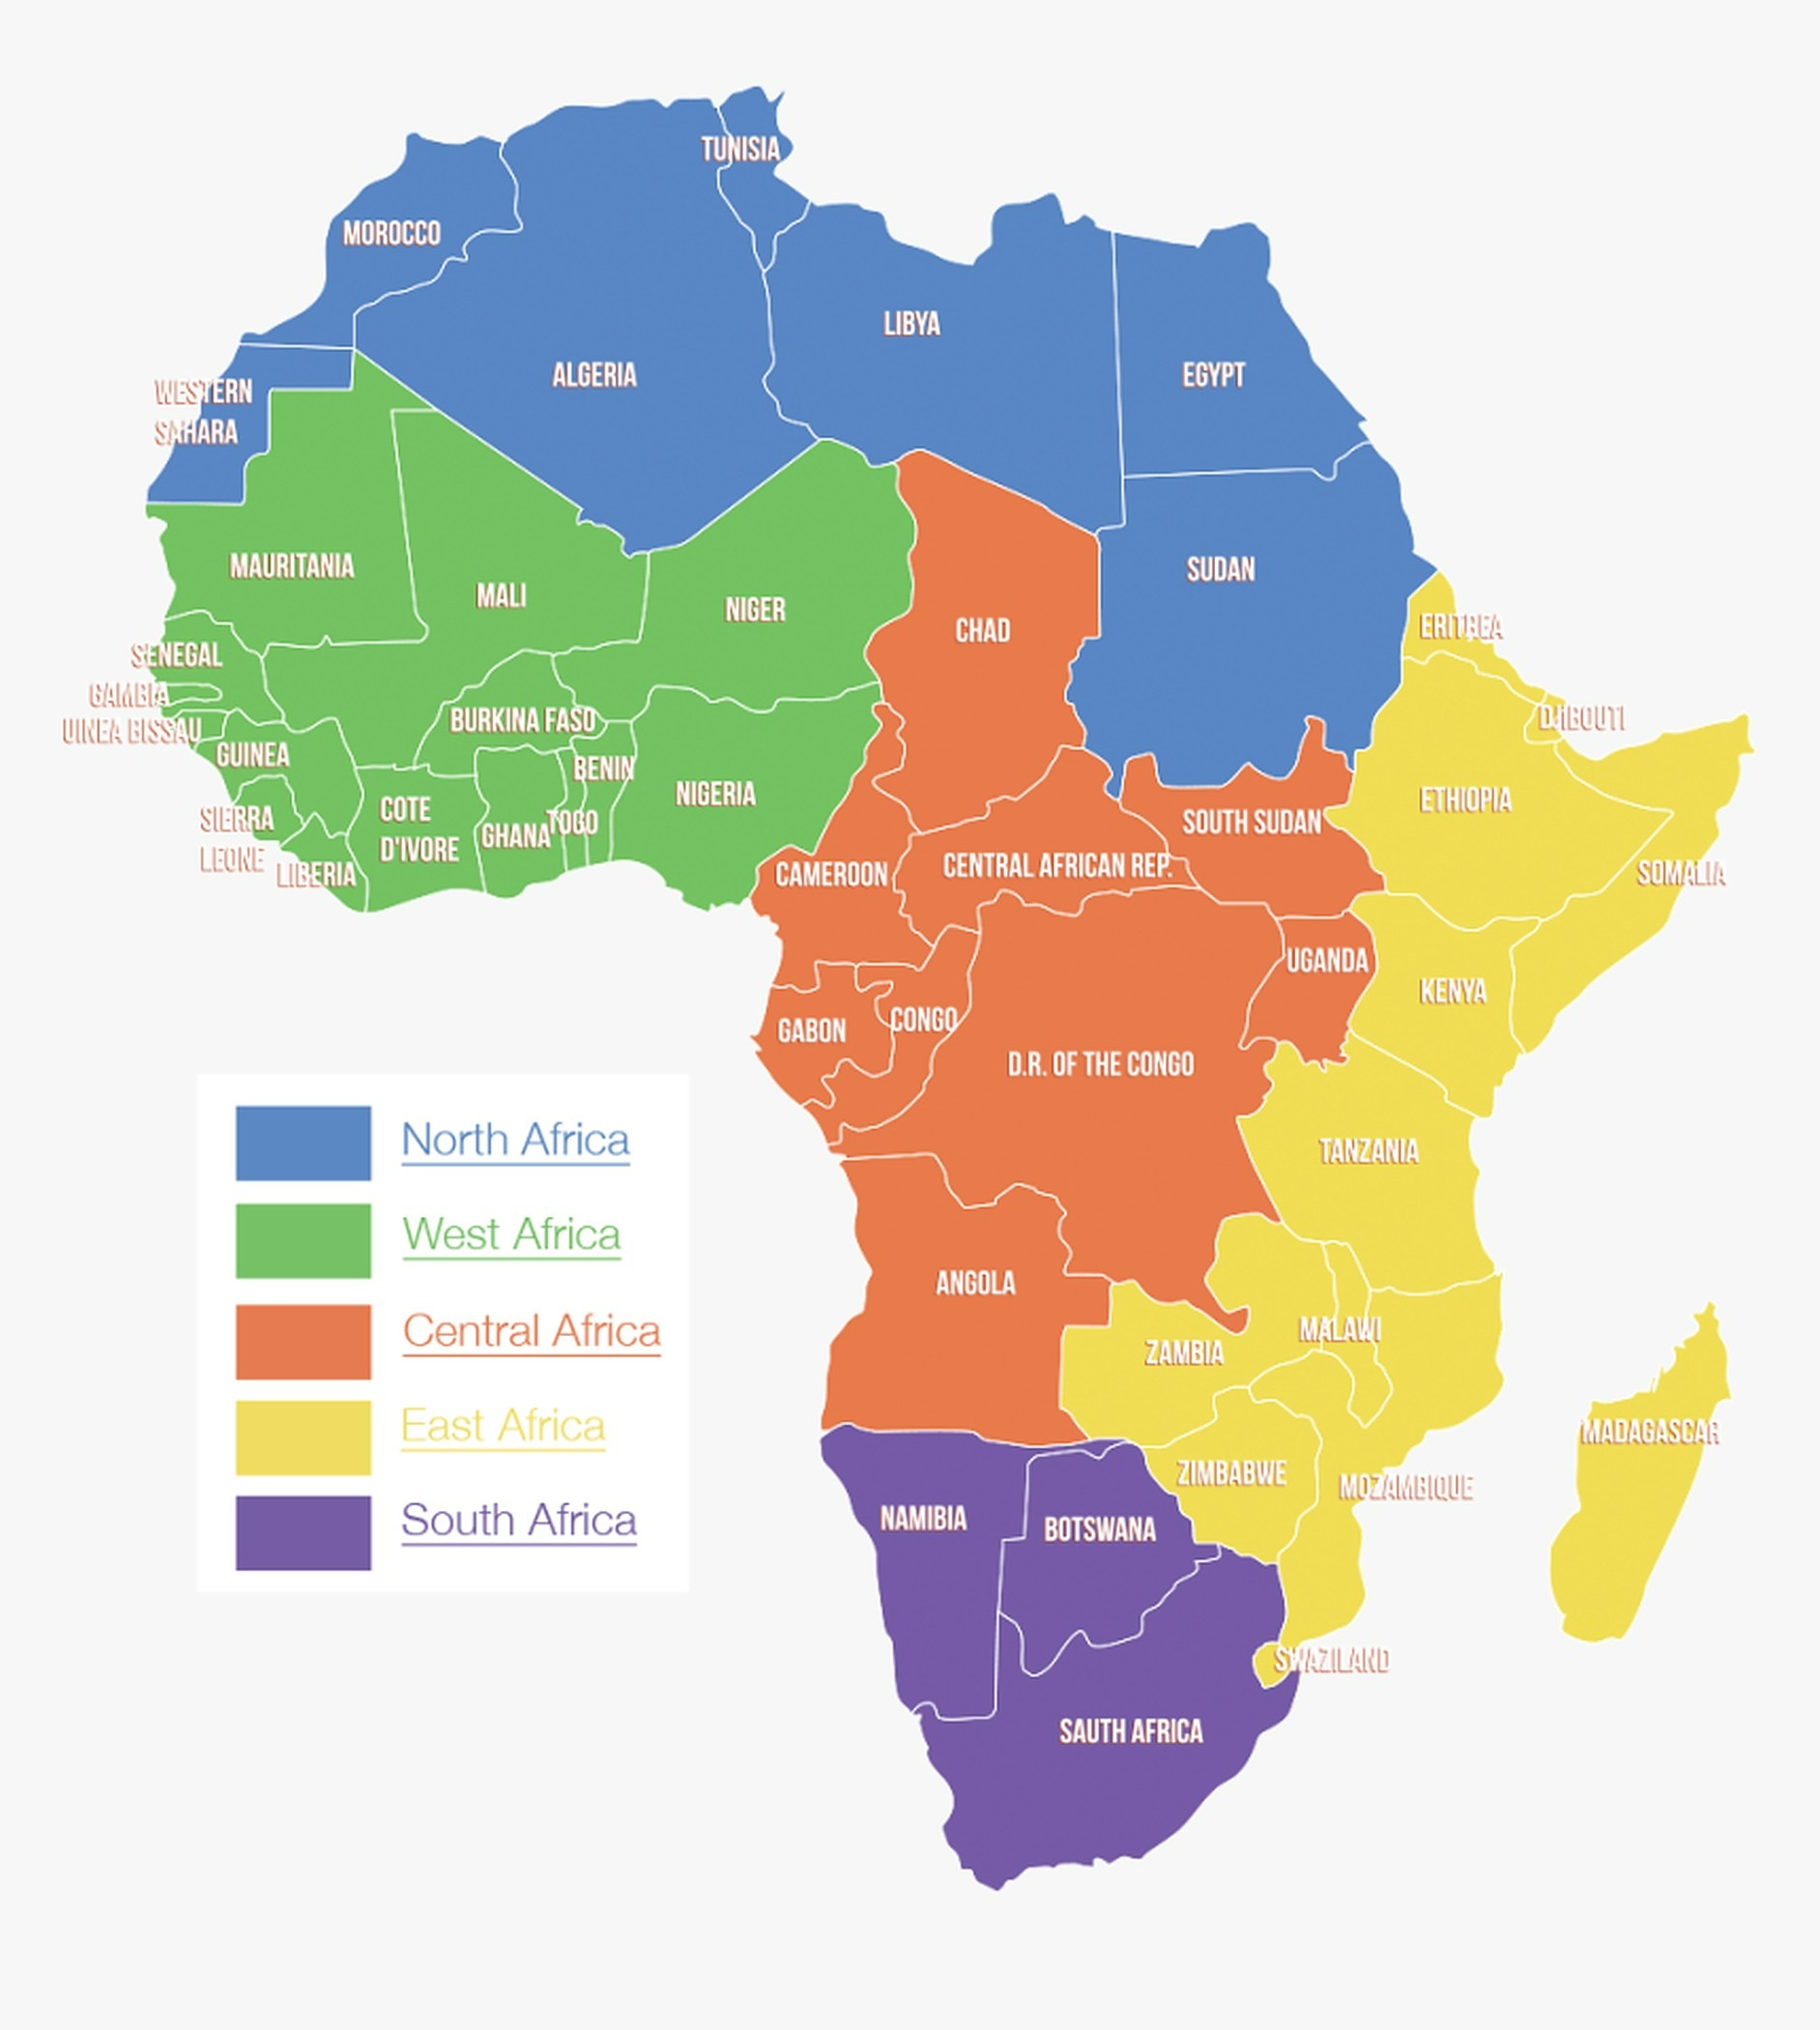 Online Retail Forex: Where Does Africa Stand?